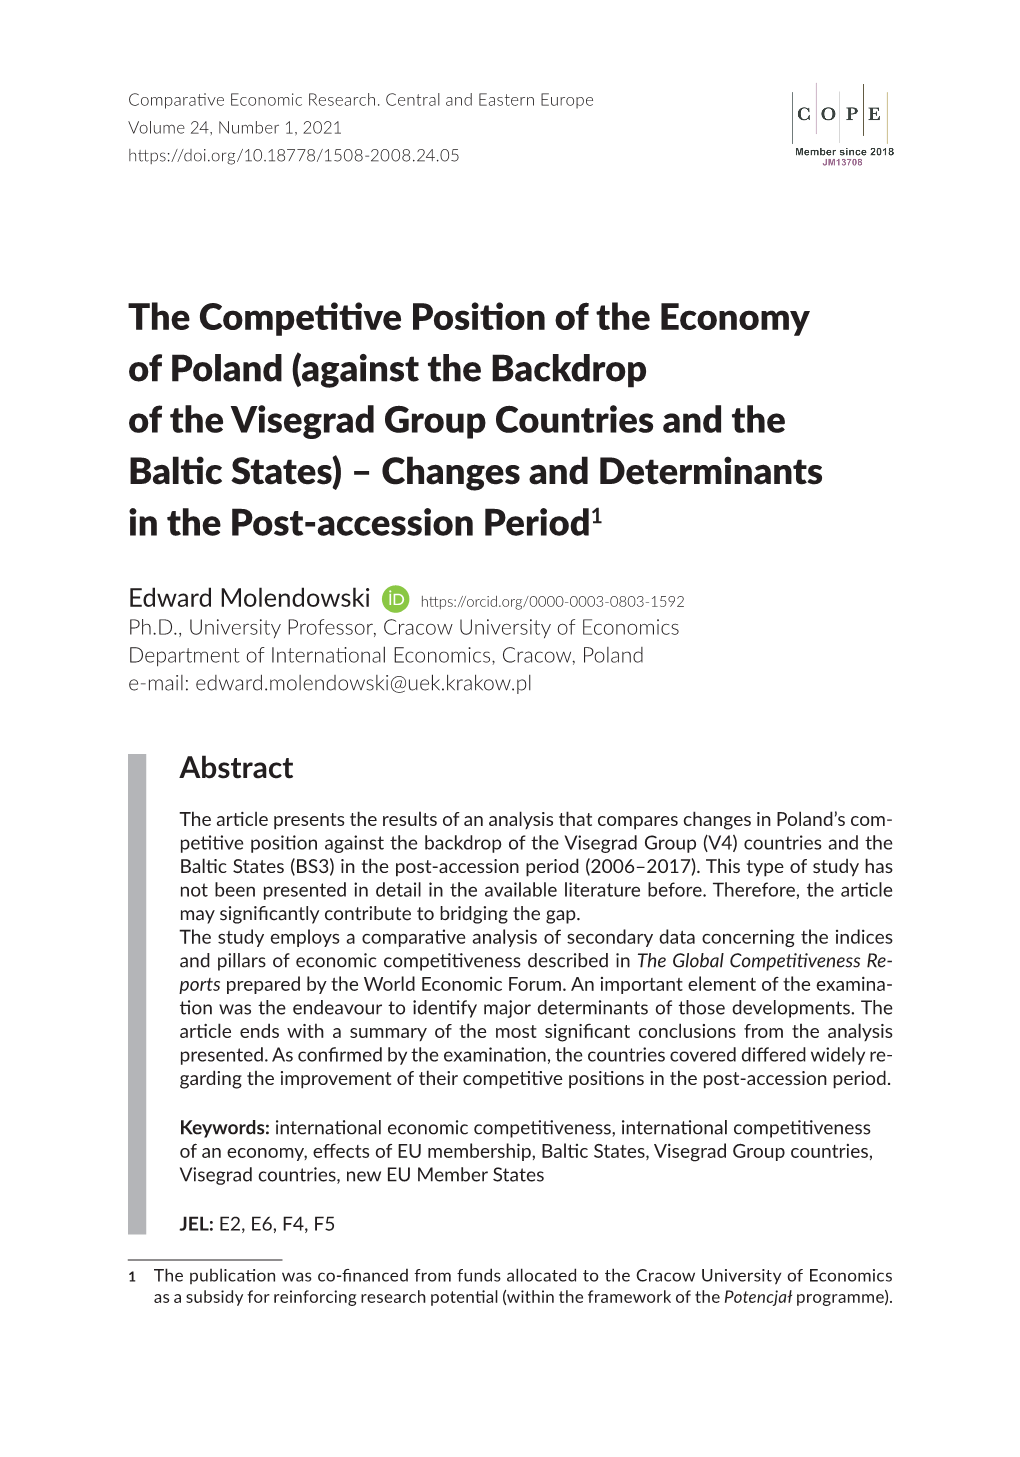 The Competitive Position of the Economy of Poland (Against The